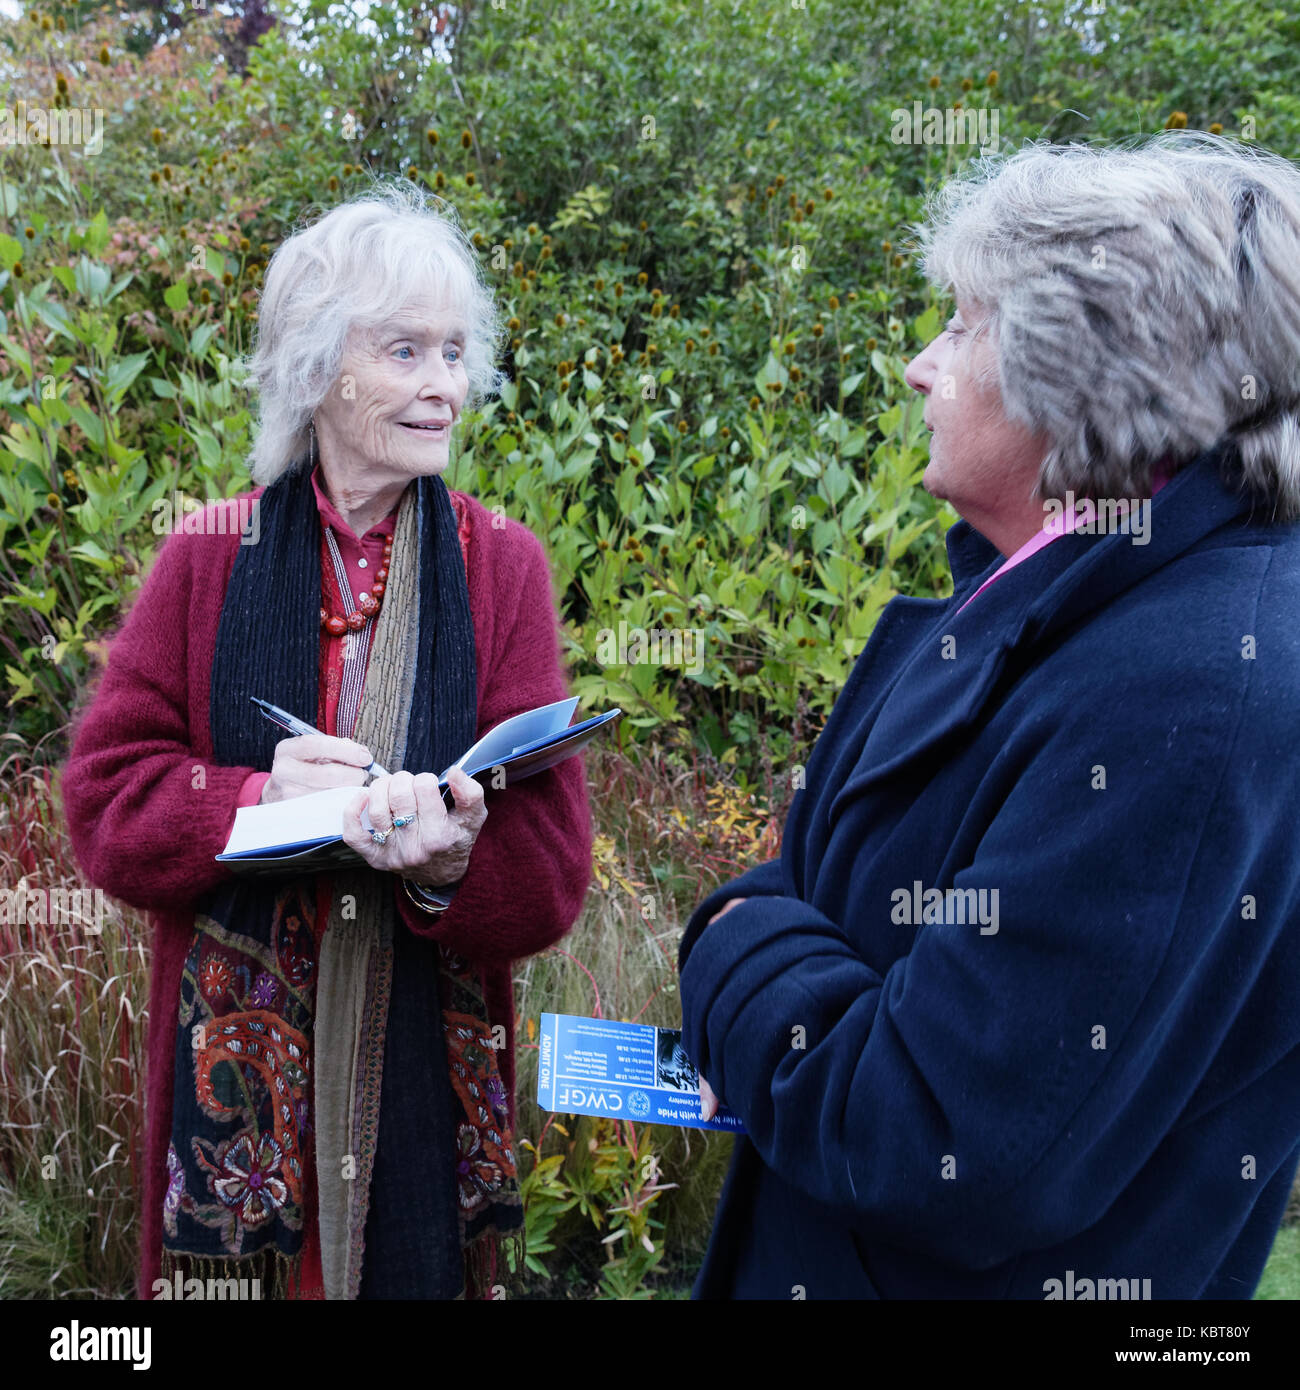 Commonwealth War Graves Cemetery Brookwood Surrey England. Virginia McKenna signs the book authored by Tania Szabo about her mother Violette whom she played in the 1958 film. Stock Photo